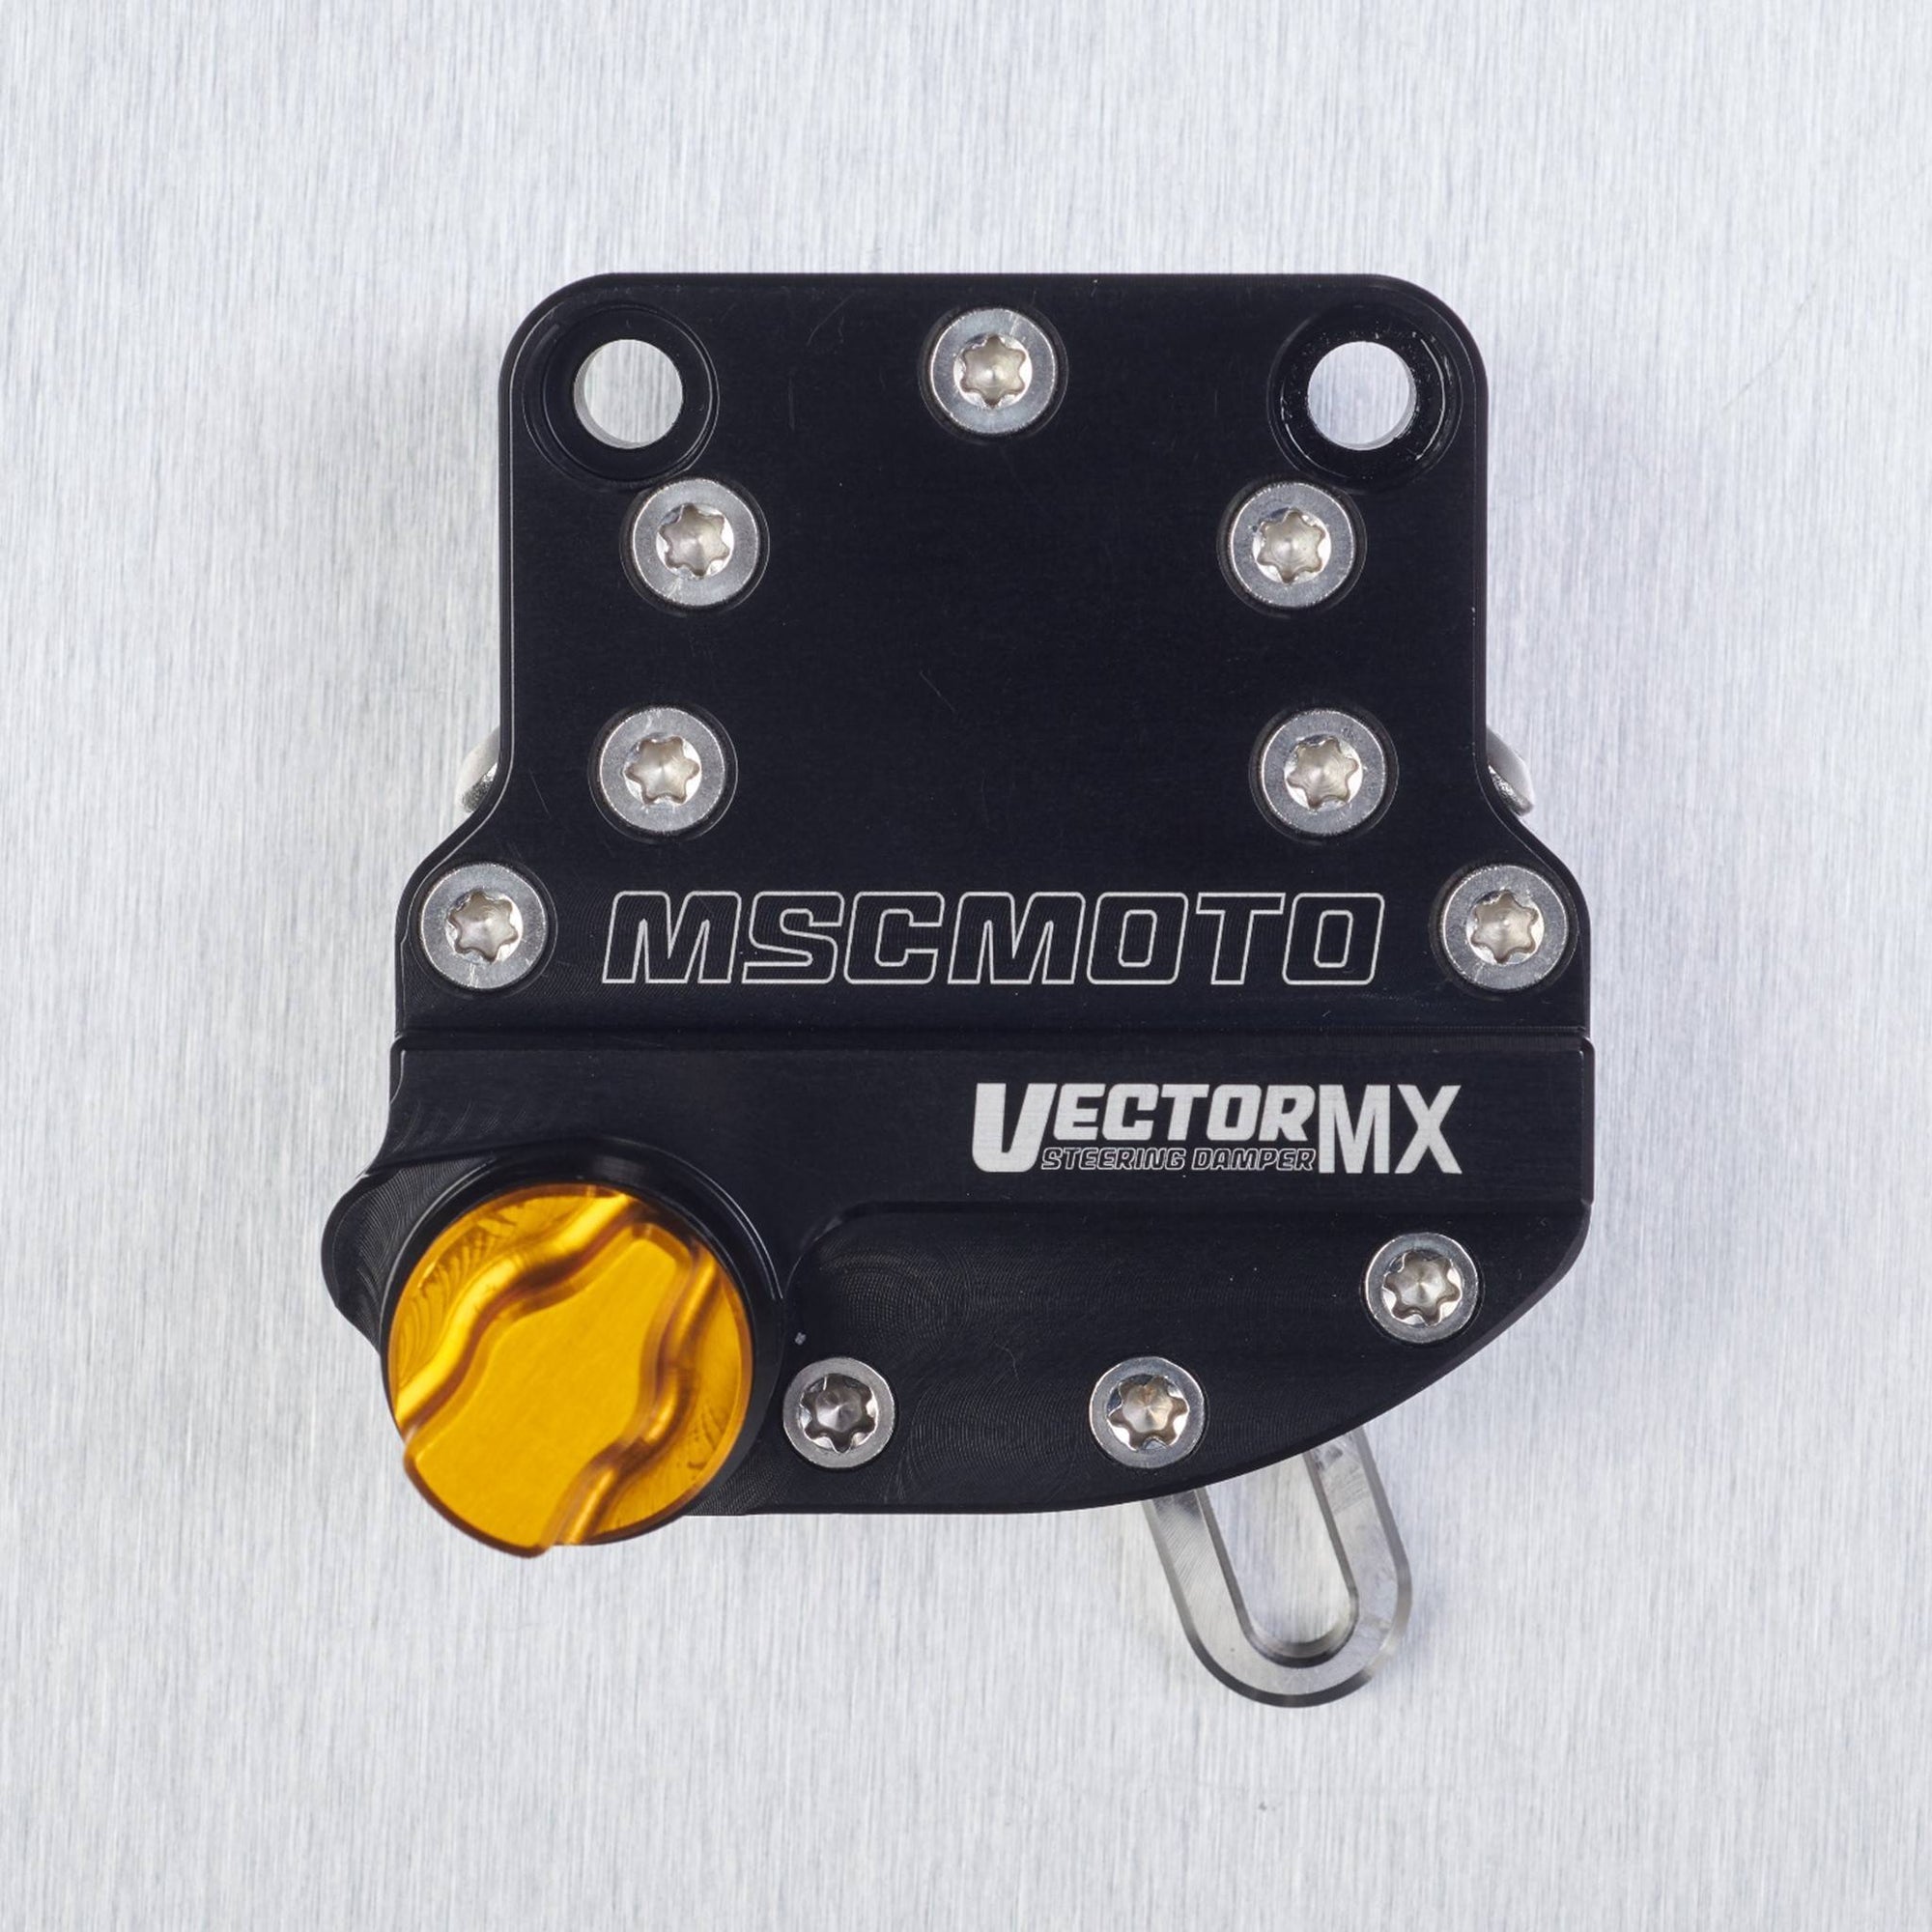 mscmotousa, VectorMX Steering Damper Kit "Down Under" Mount (VEC0010) - GAS GAS MC 85, YAMAHA YZ85, VEC0010, gas gas, gas-gas-2021-mc-85-esi2531830, vectormx, yamaha, yamaha-2013-yz85-esi4537843, , Imported and distributed in North & South America by Lindeco Genuine Powersports.